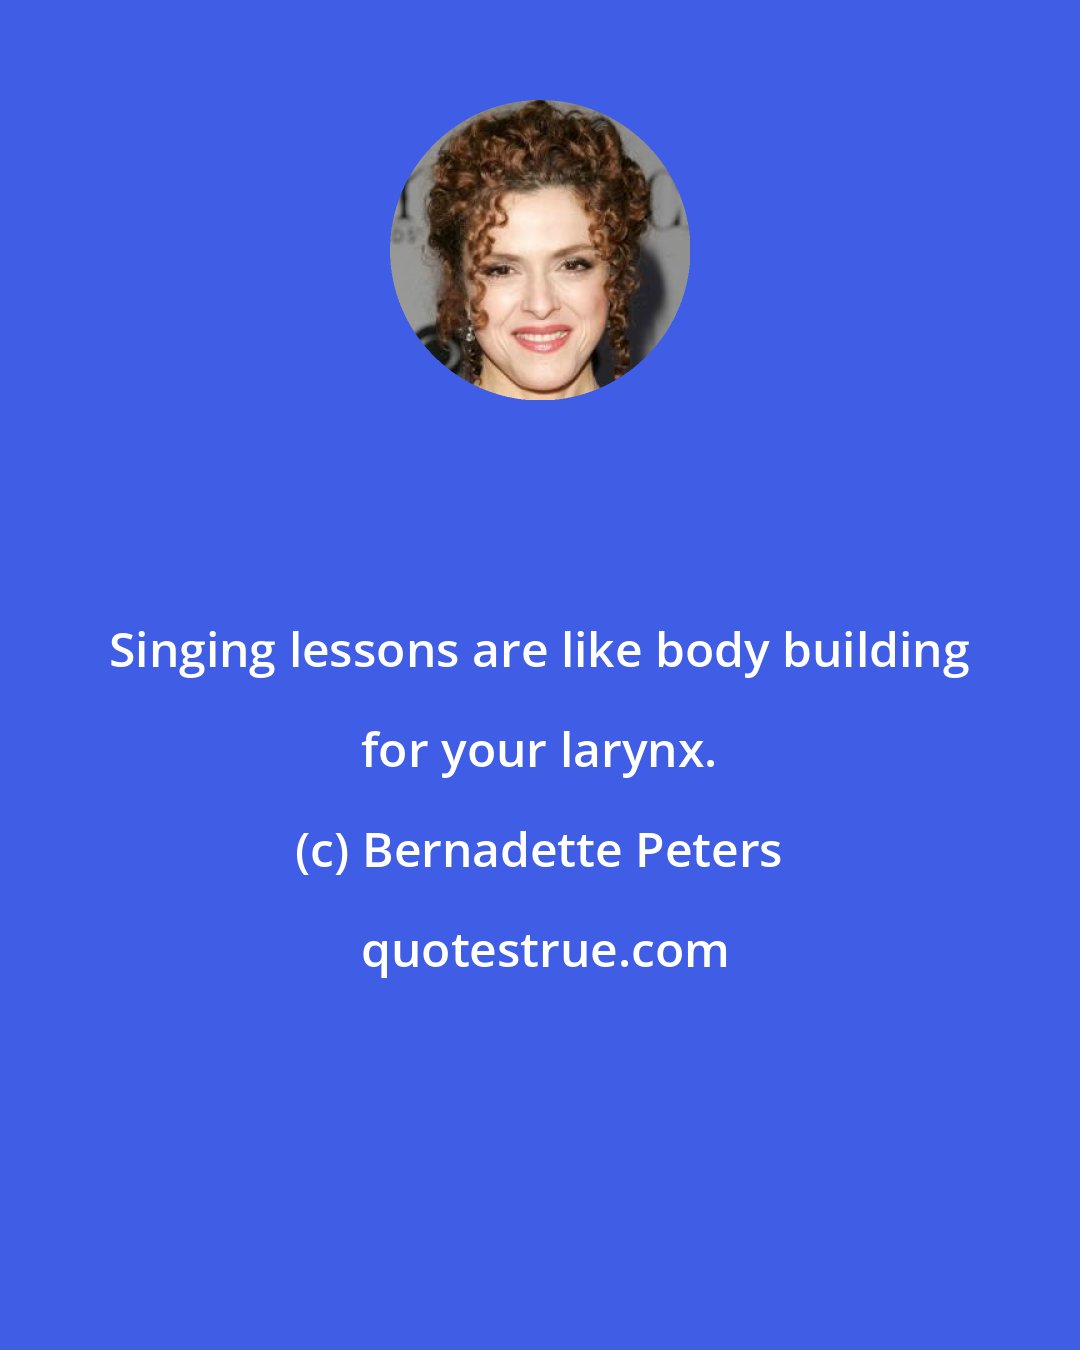 Bernadette Peters: Singing lessons are like body building for your larynx.